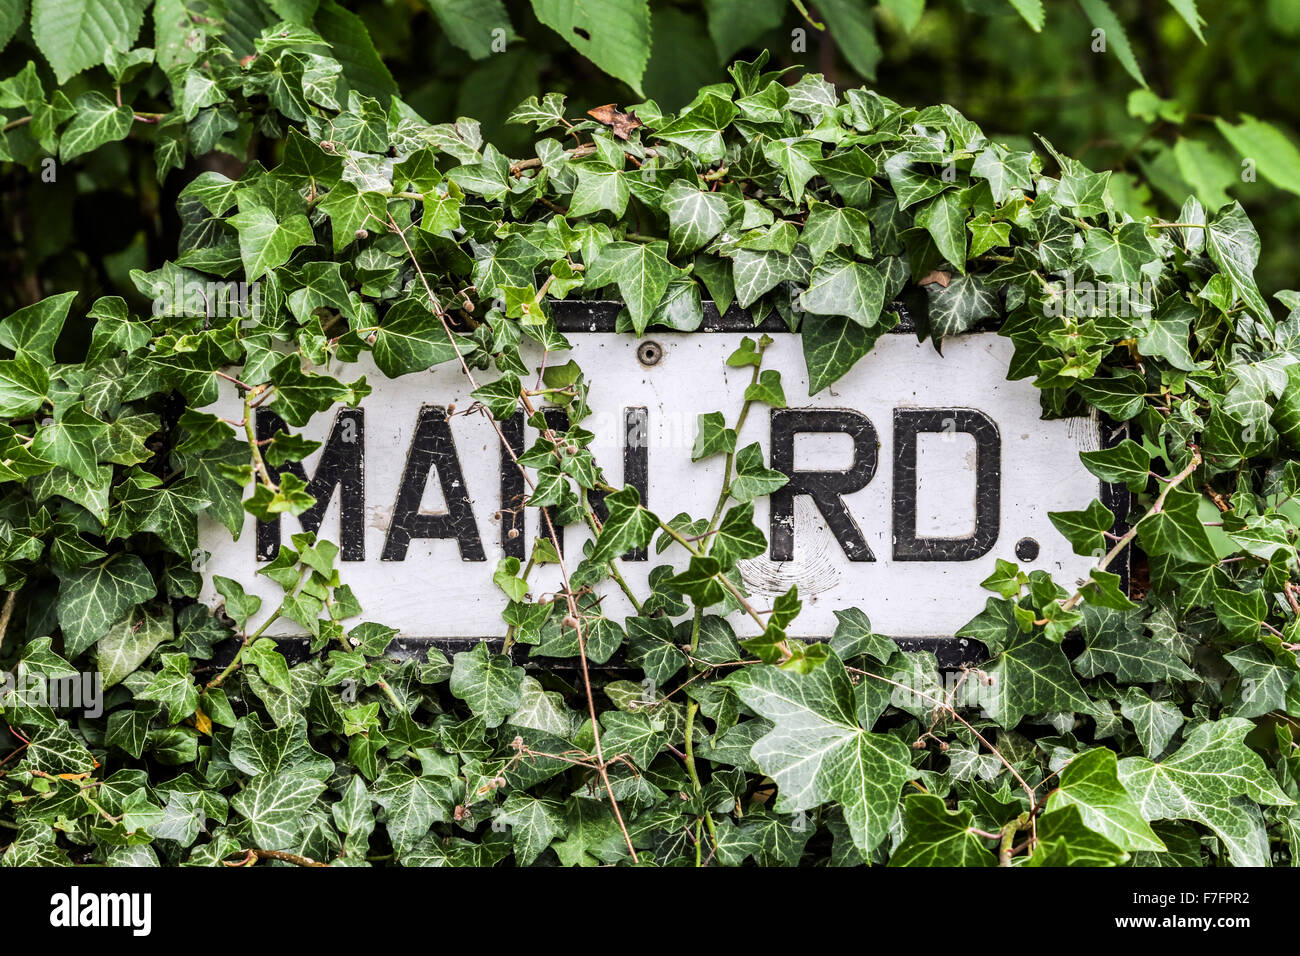 Main Road road sign over grown with vines Stock Photo